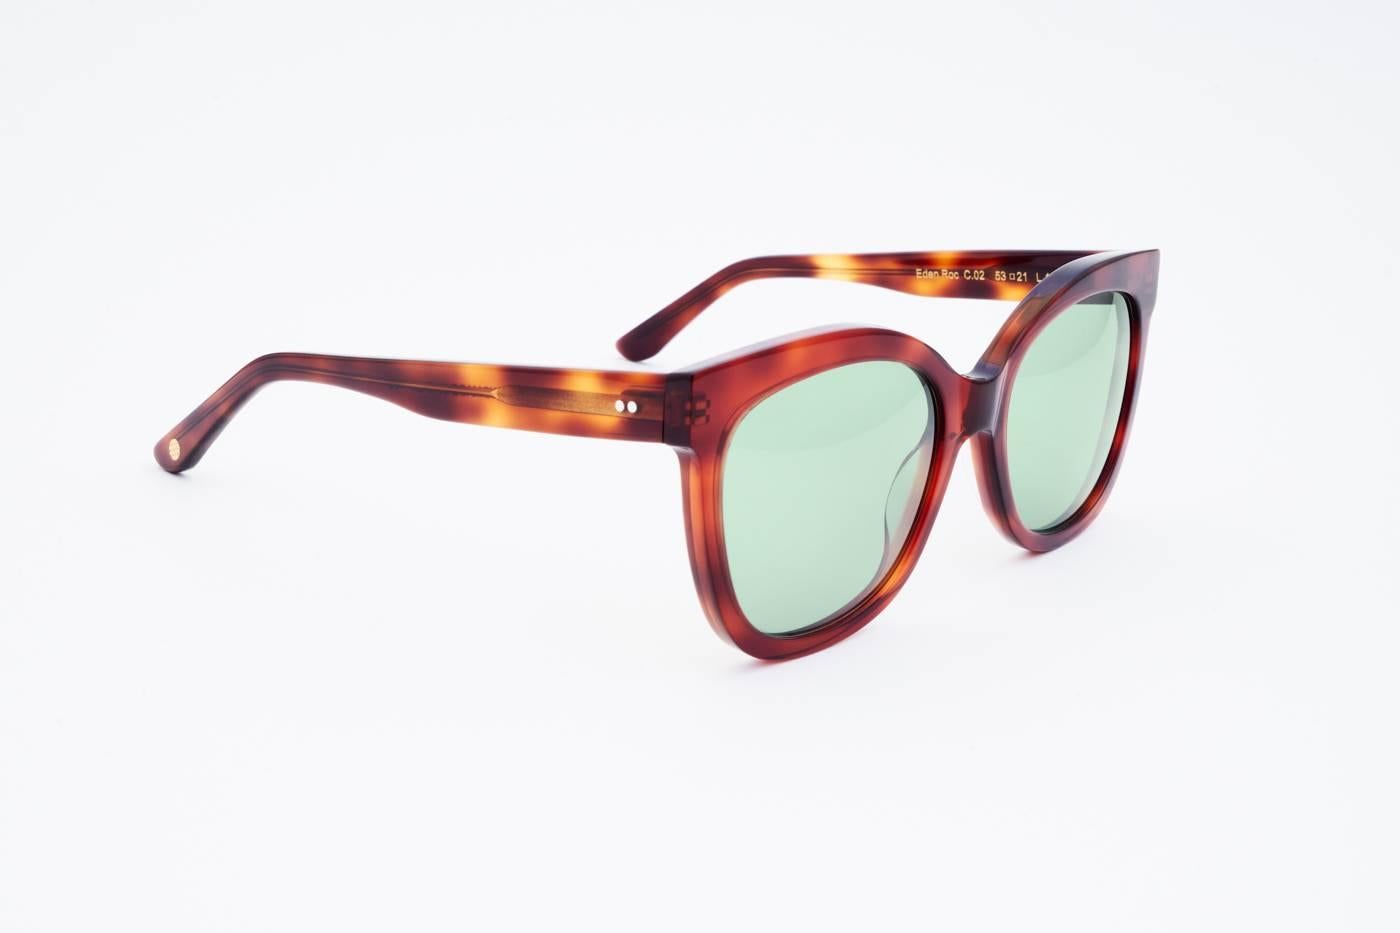 Berenford Eden Roc spectacle was inspired by style icon Audrey Hepburn. Enjoying the sun behind the cat eye shades, Audrey succeeded hiding from the paparazzi at the old glam place, a setting of Fitzgerald’s “Tender Is The Night”. Upon arrival,